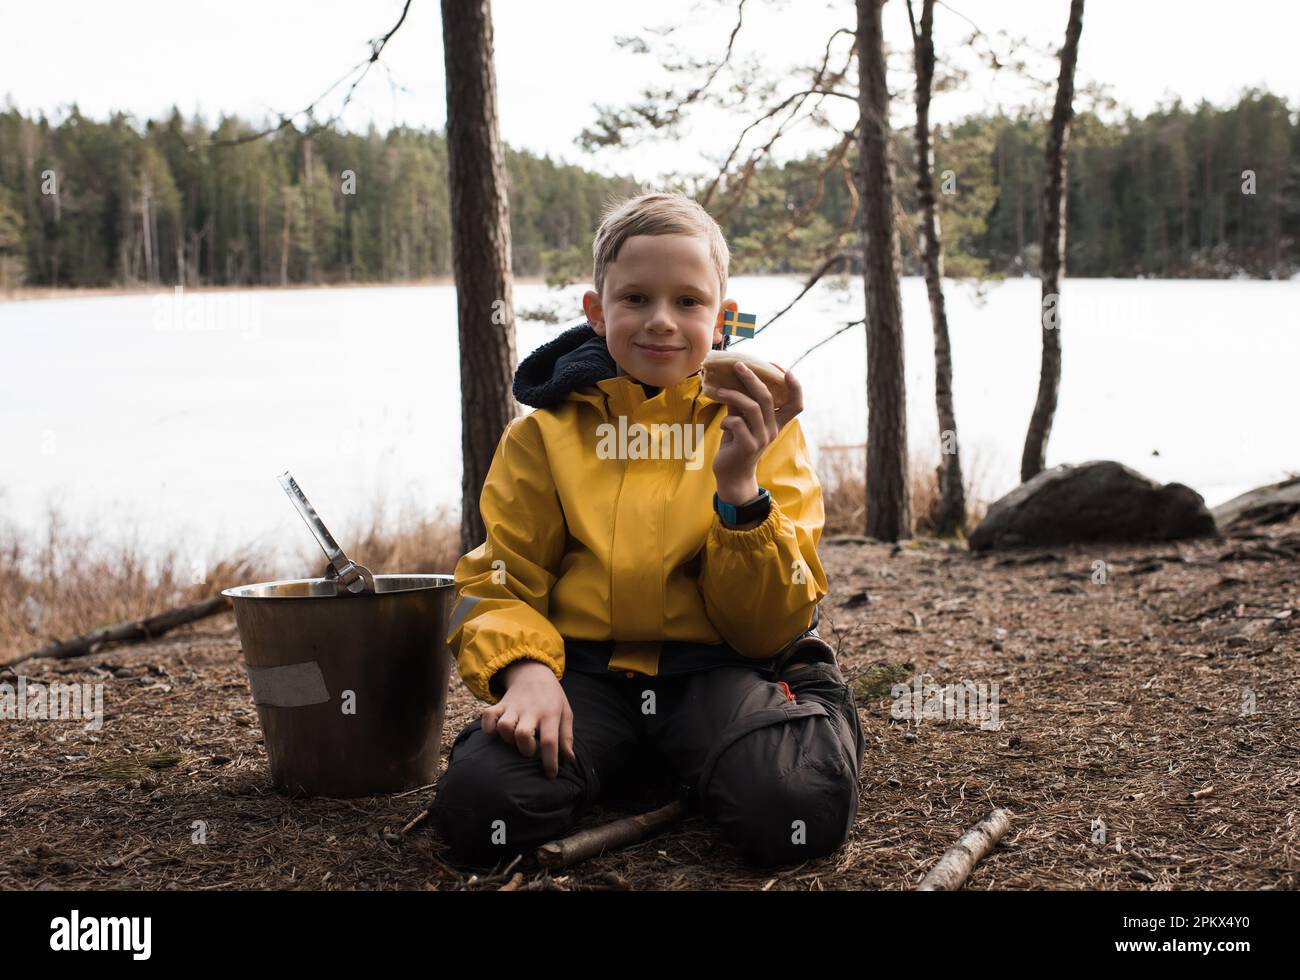 Swedish boy holding a hot dog with a Swedish flag in a national park Stock Photo